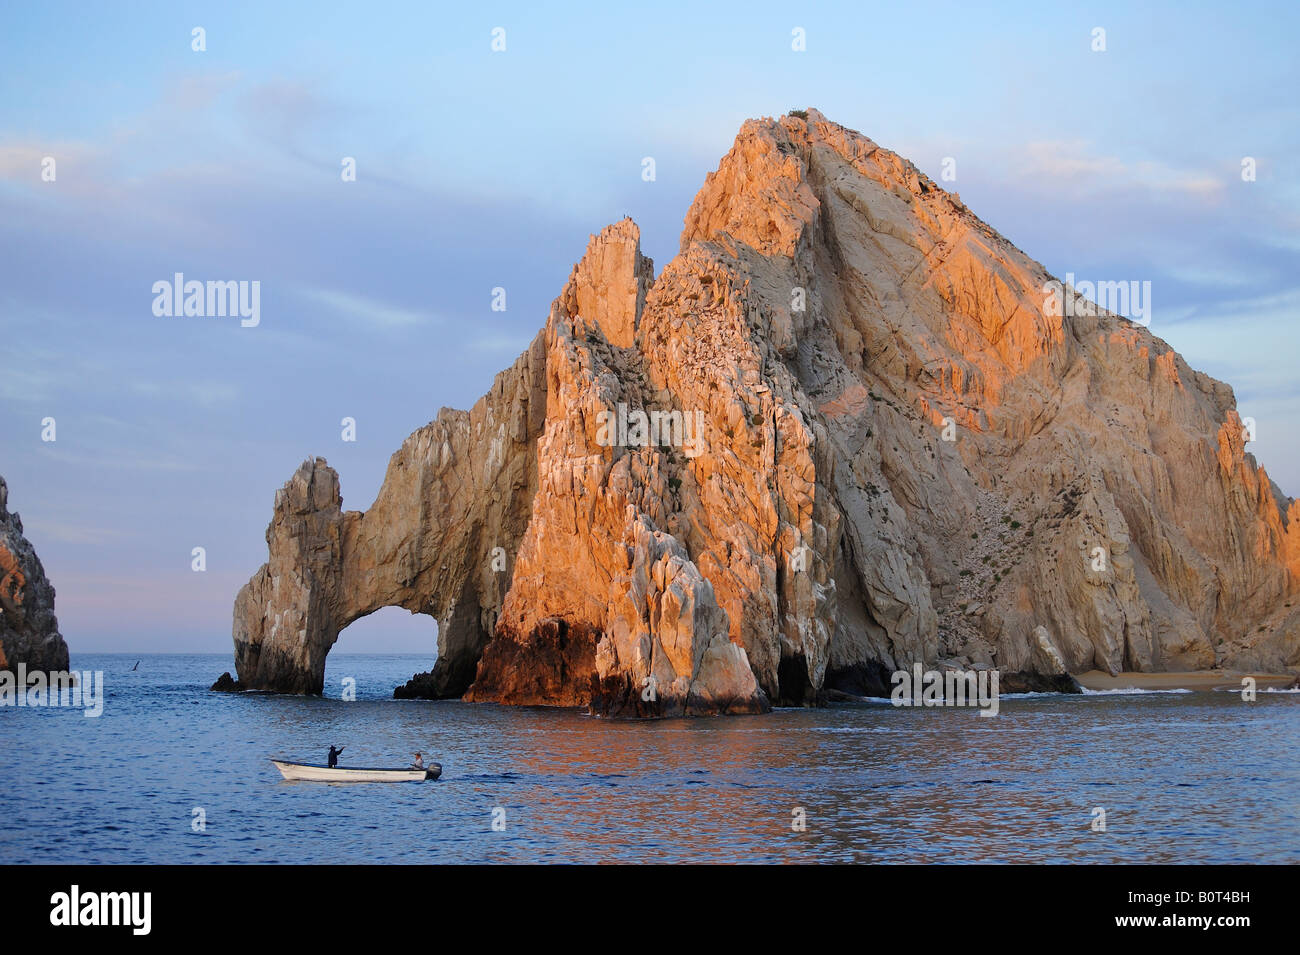 'A little morning fishing at El Arco del Cabo San Lucas.' Stock Photo